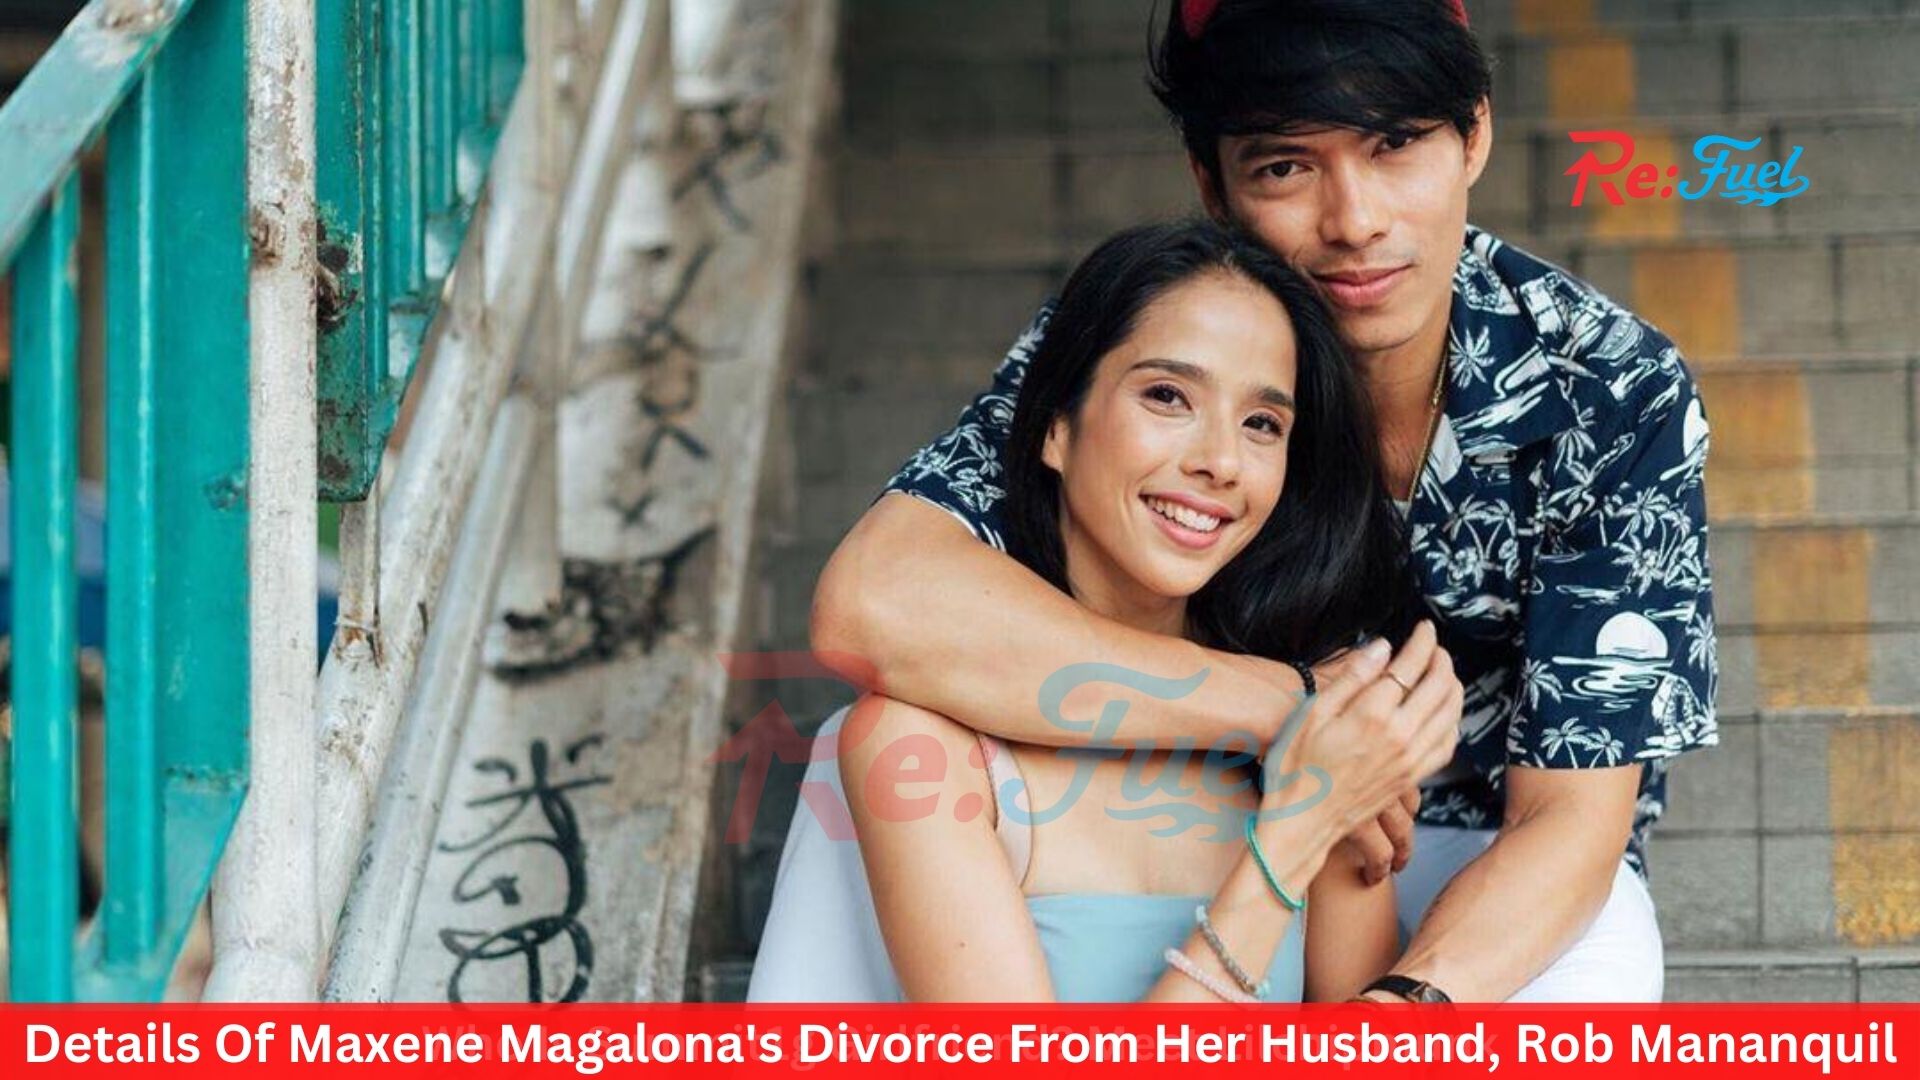 Details Of Maxene Magalona’s Divorce From Her Husband, Rob Mananquil